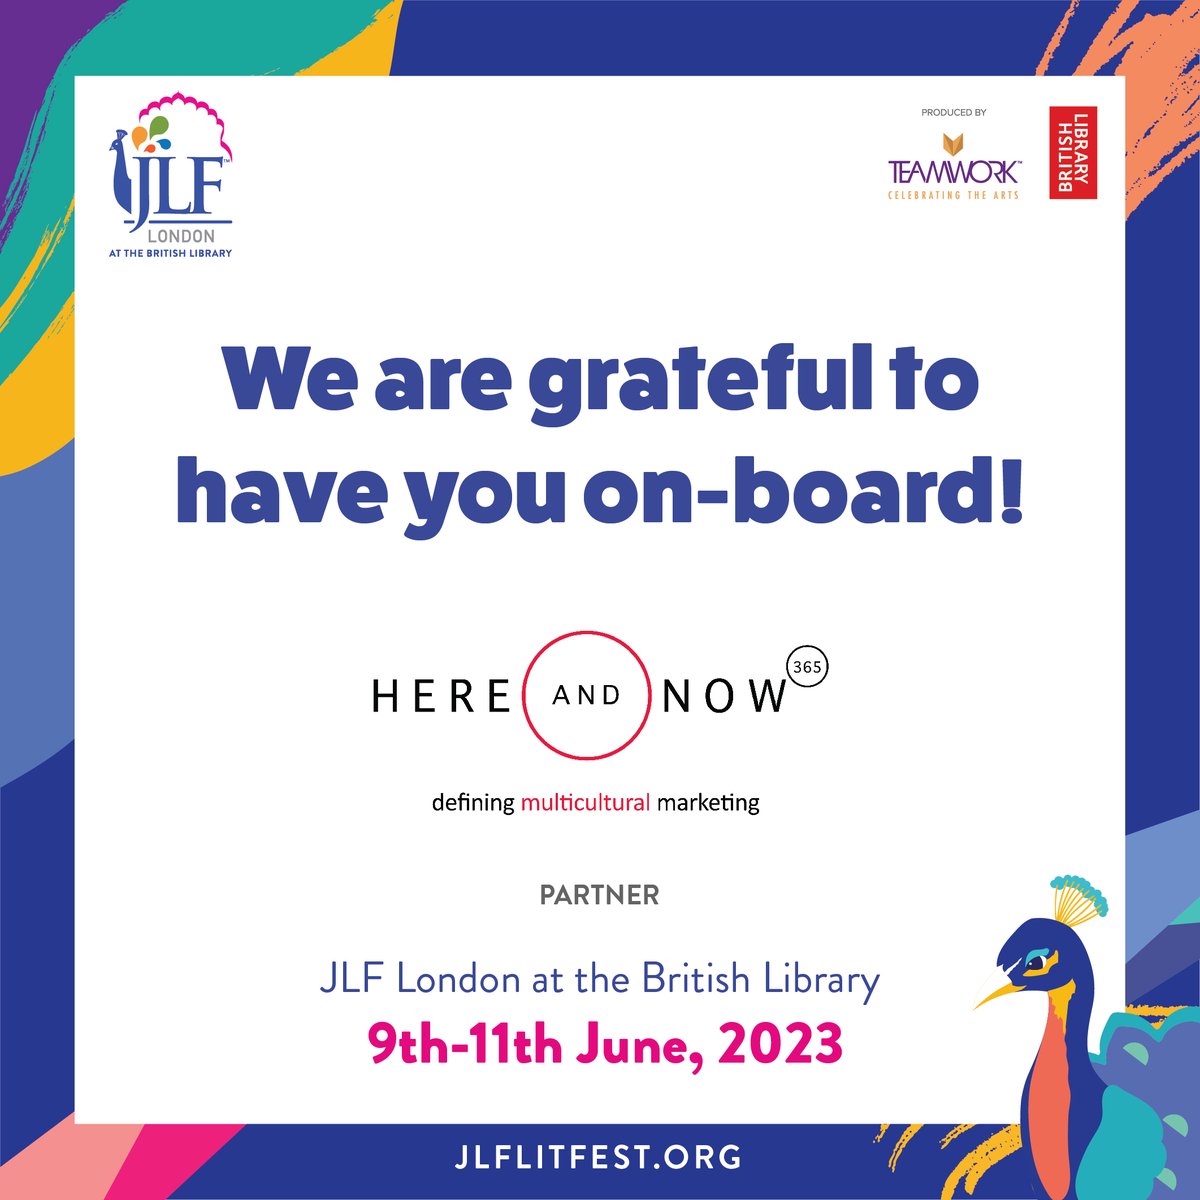 The 10th edition of JLF London at the British Library is set to be celebrated from 9th-11th June, 2023. We are grateful to have @hereandnow365 on-board as a partner! Book your tickets now! bl.uk/events/jlf-jai…